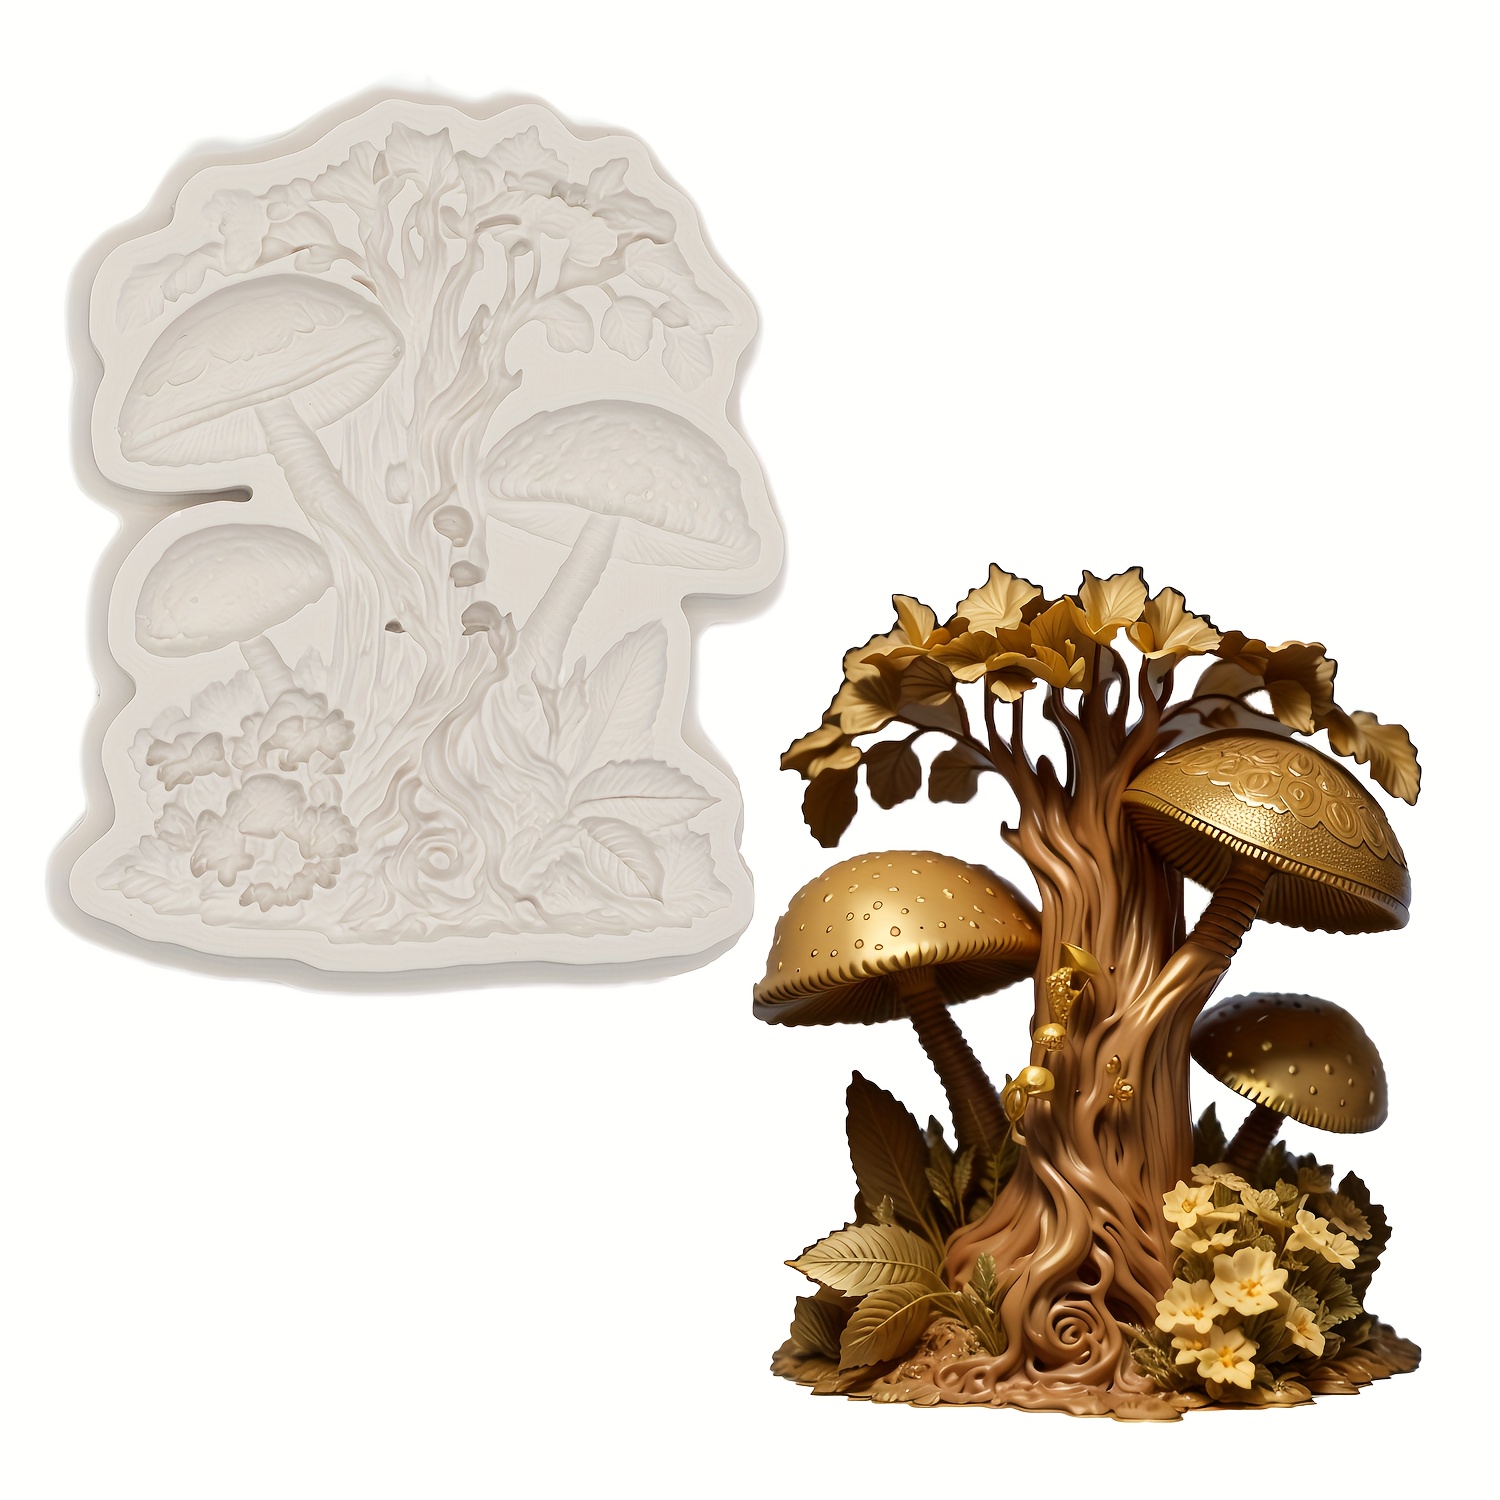 

1pc, Rustic Mushroom Tree Silicone Mold For Cake Decorating & Diy Crafts, Epoxy Resin Embossing, European Style Pattern, Durable Food-grade Material